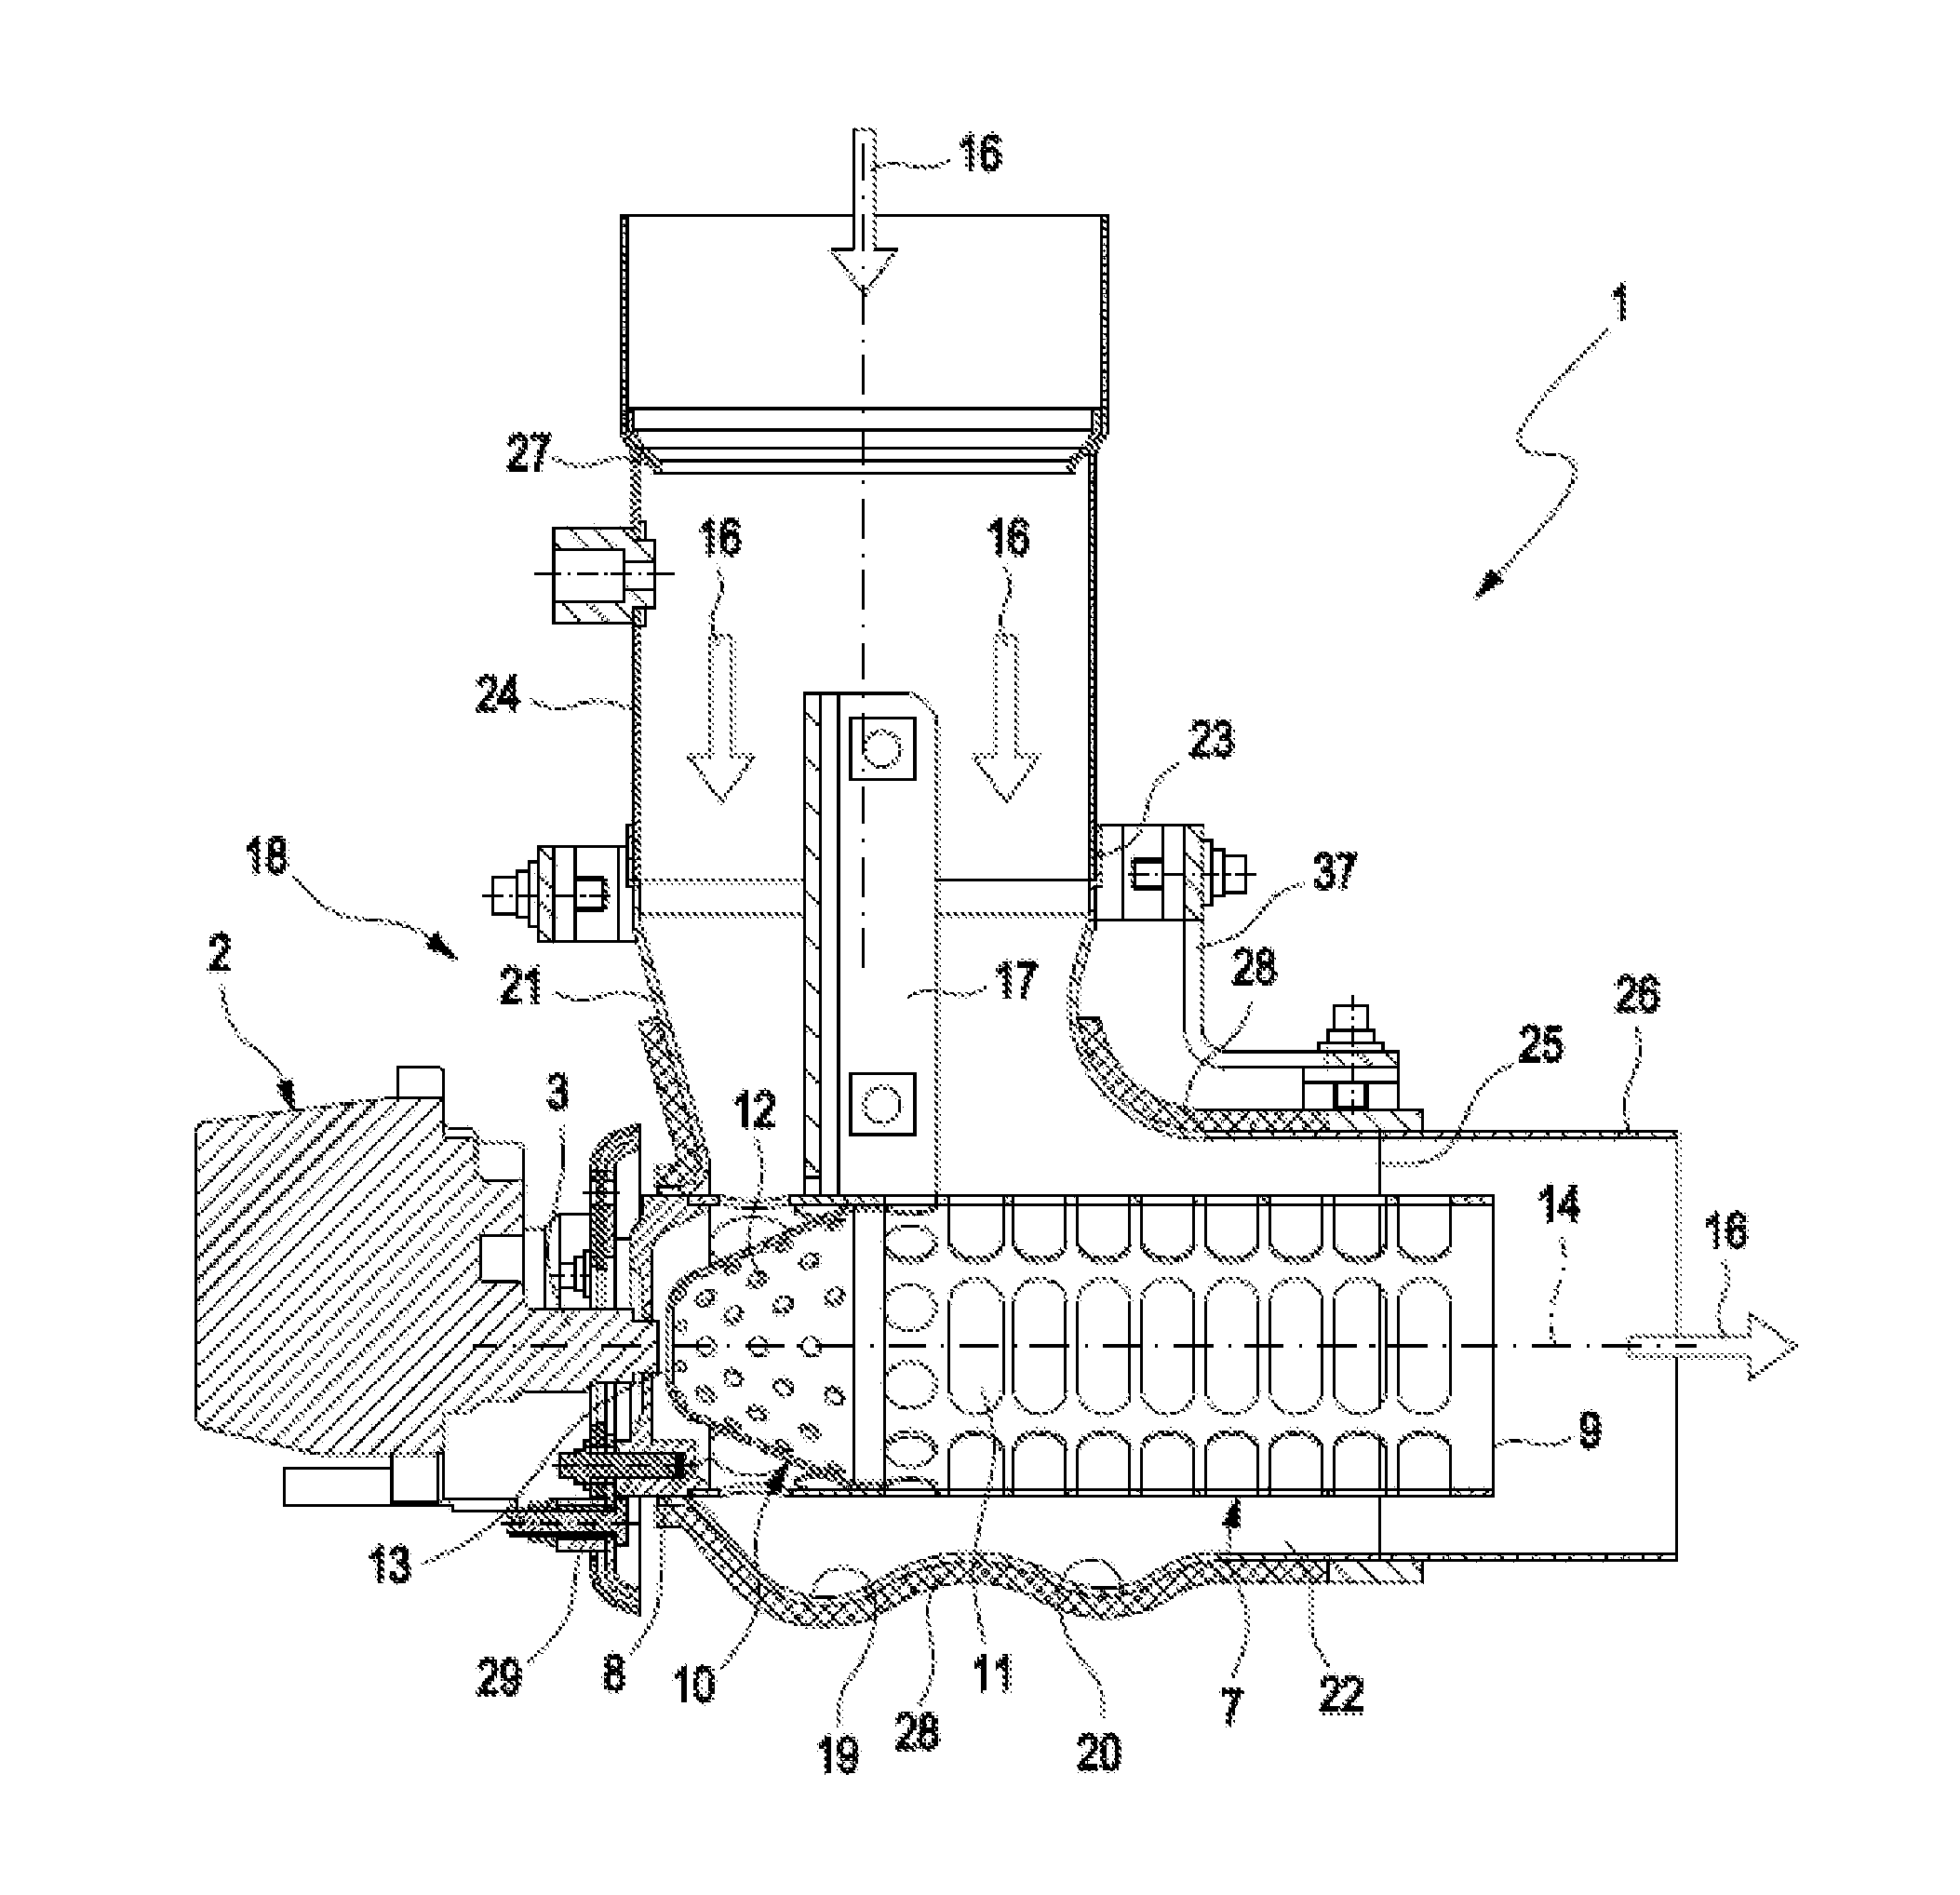 System for Adding and Processing Reducing Agent in a Motor Vehicle